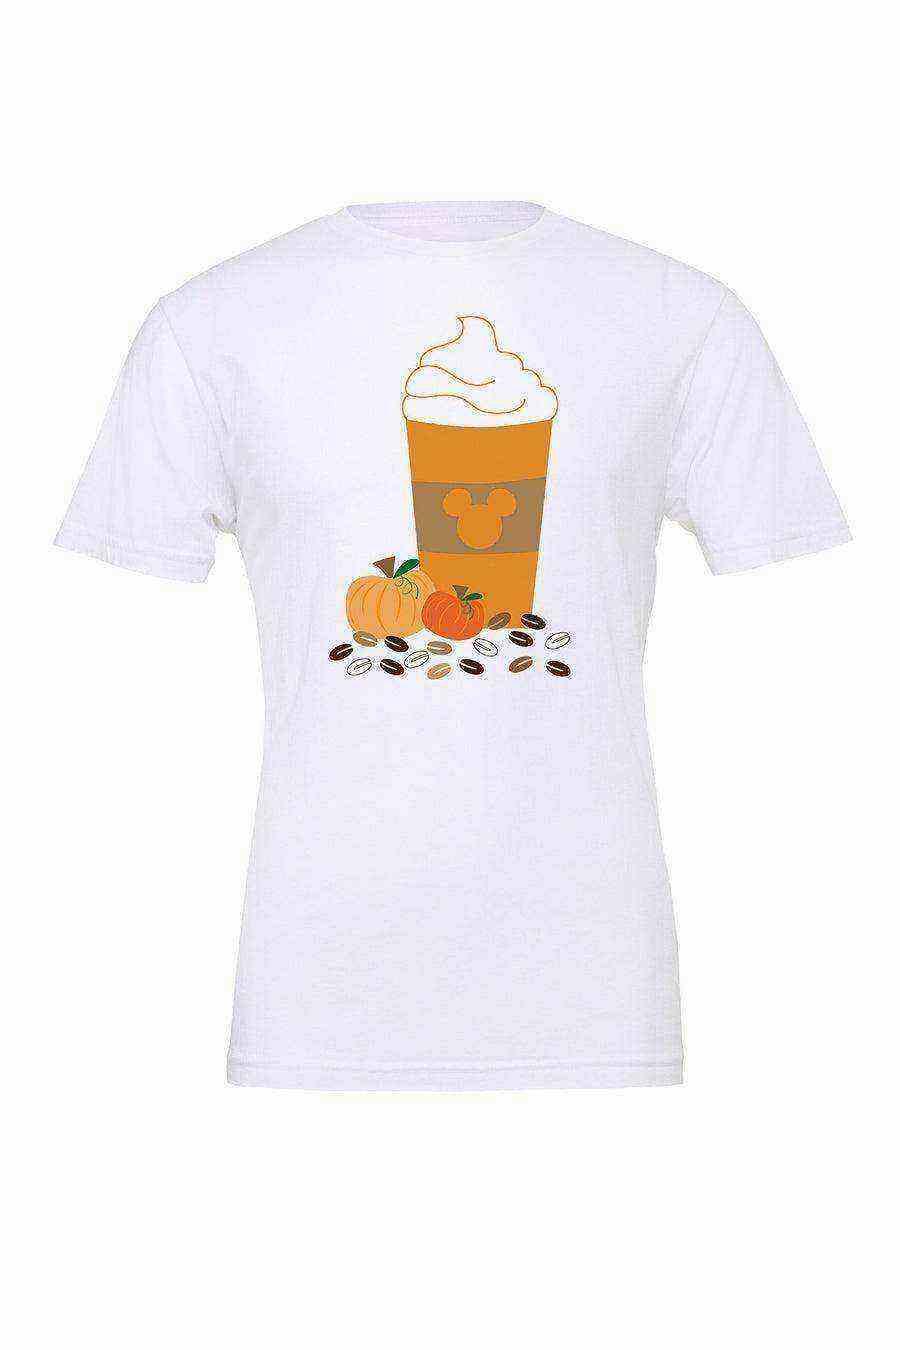 Youth | Pumpkin Spice Latte Shirt - Dylan's Tees